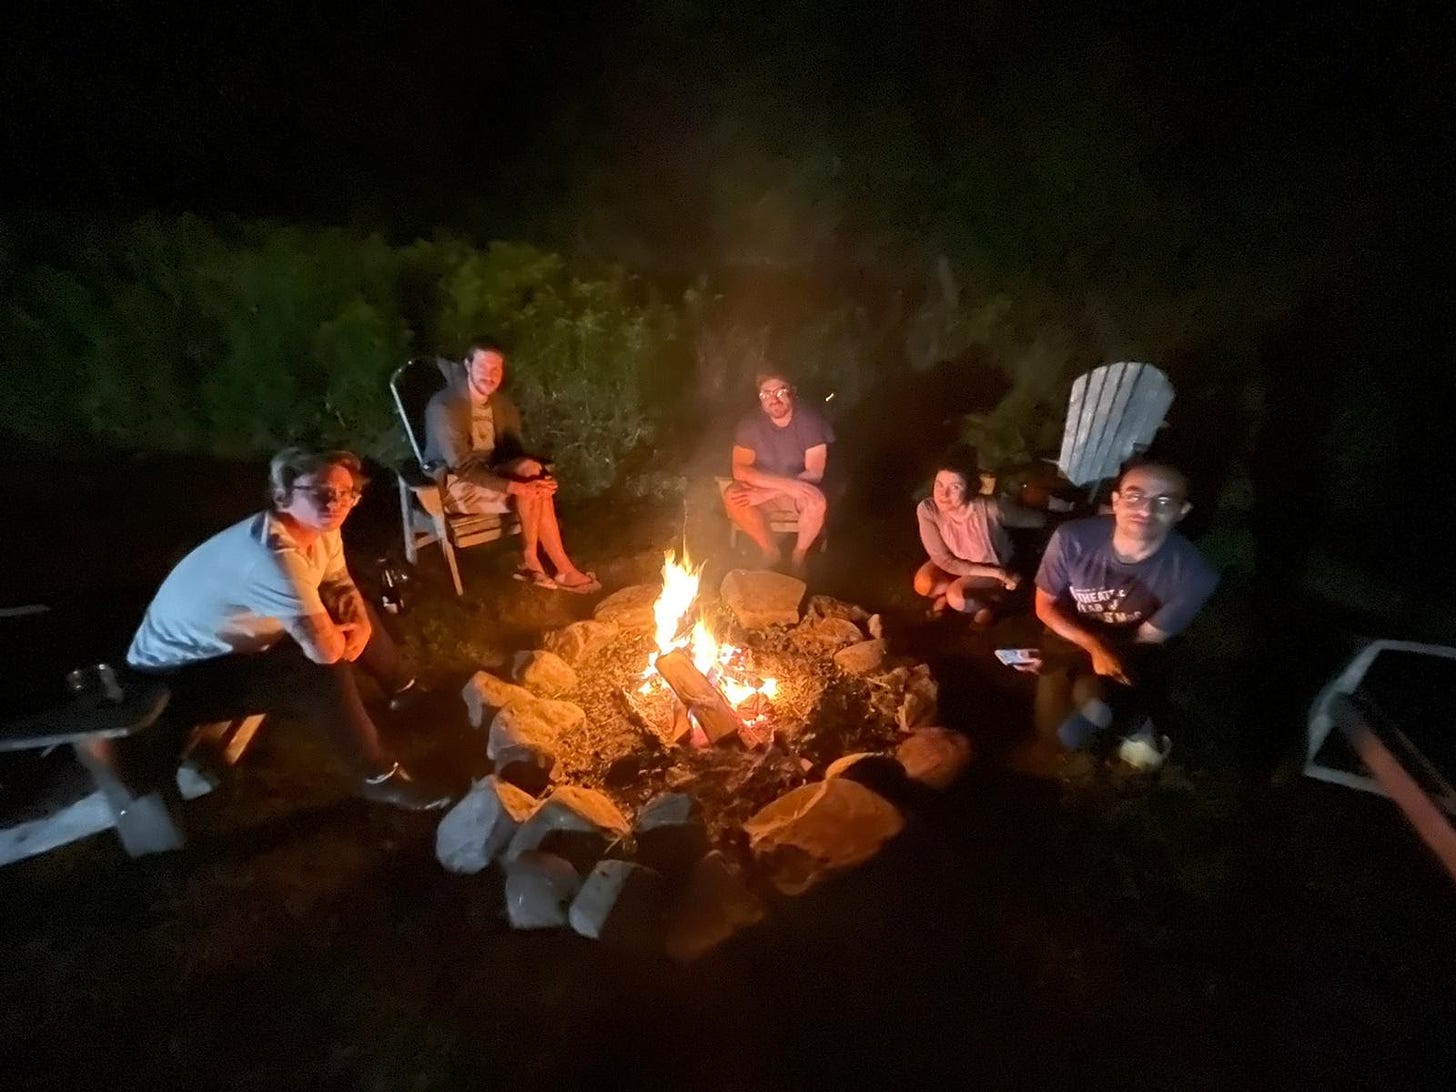 A group of young people sit around a fire at night